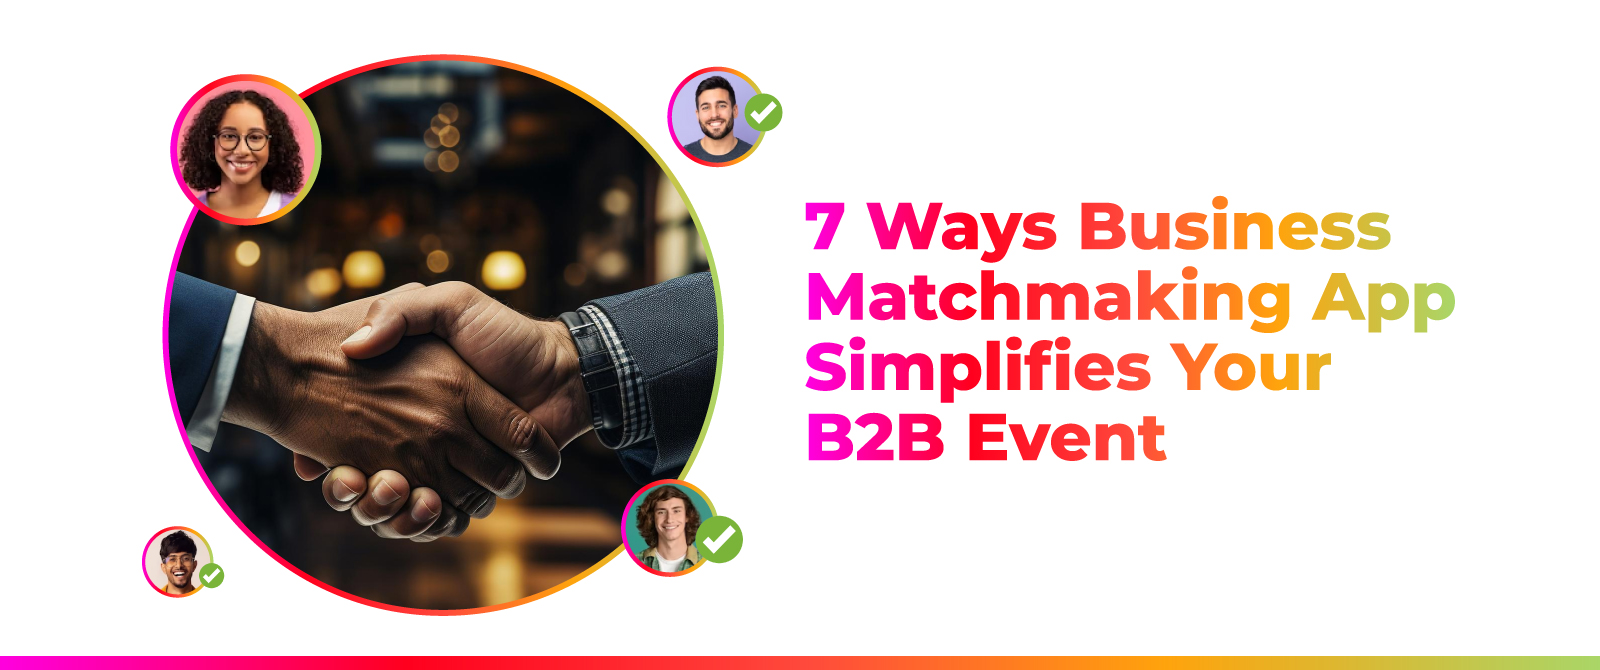 7 Ways Business Matchmaking App Simplifies Your B2B Event